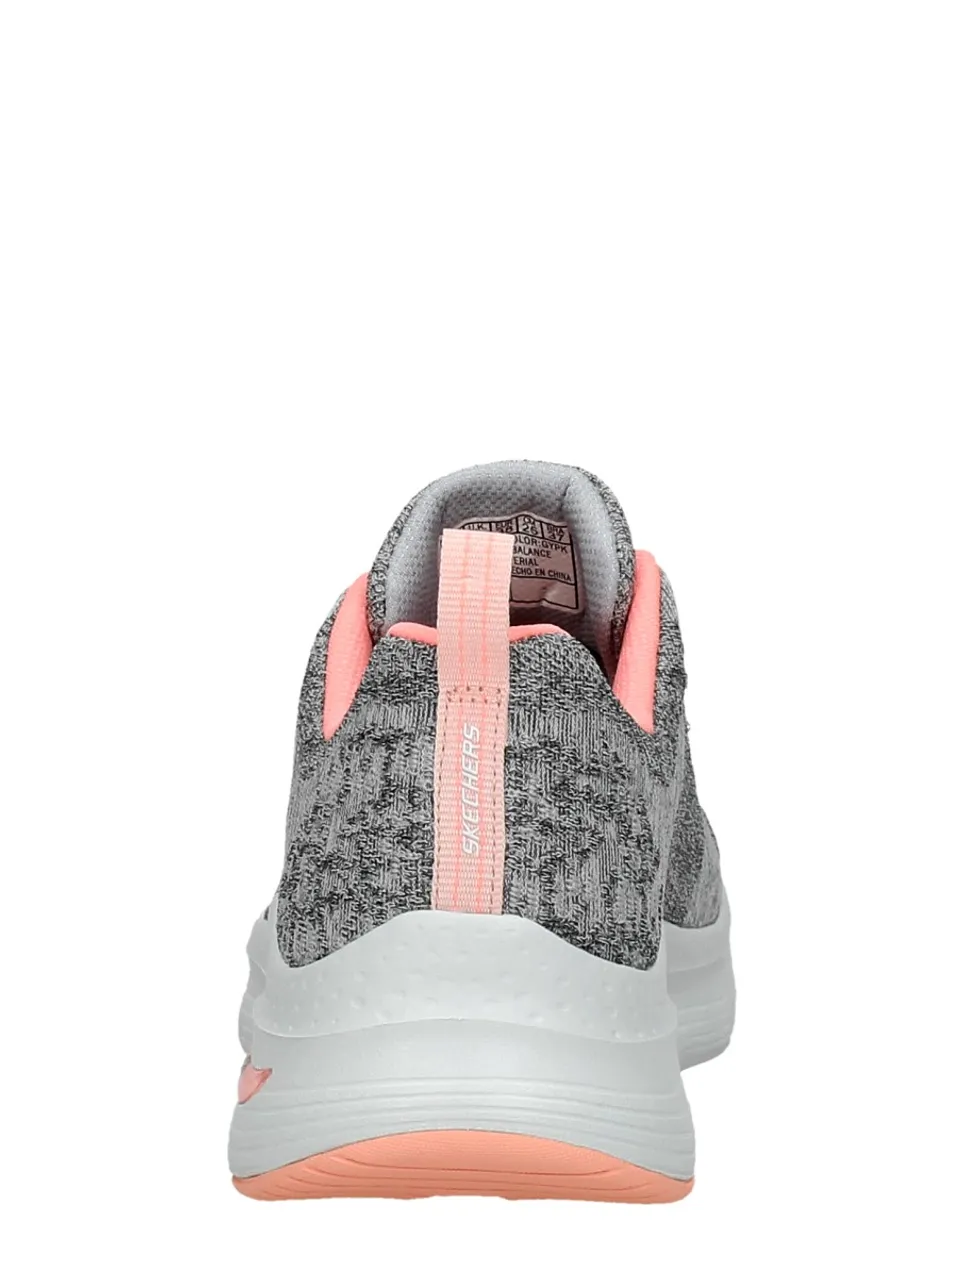 Skechers - Arch Fit - Comfy Wave